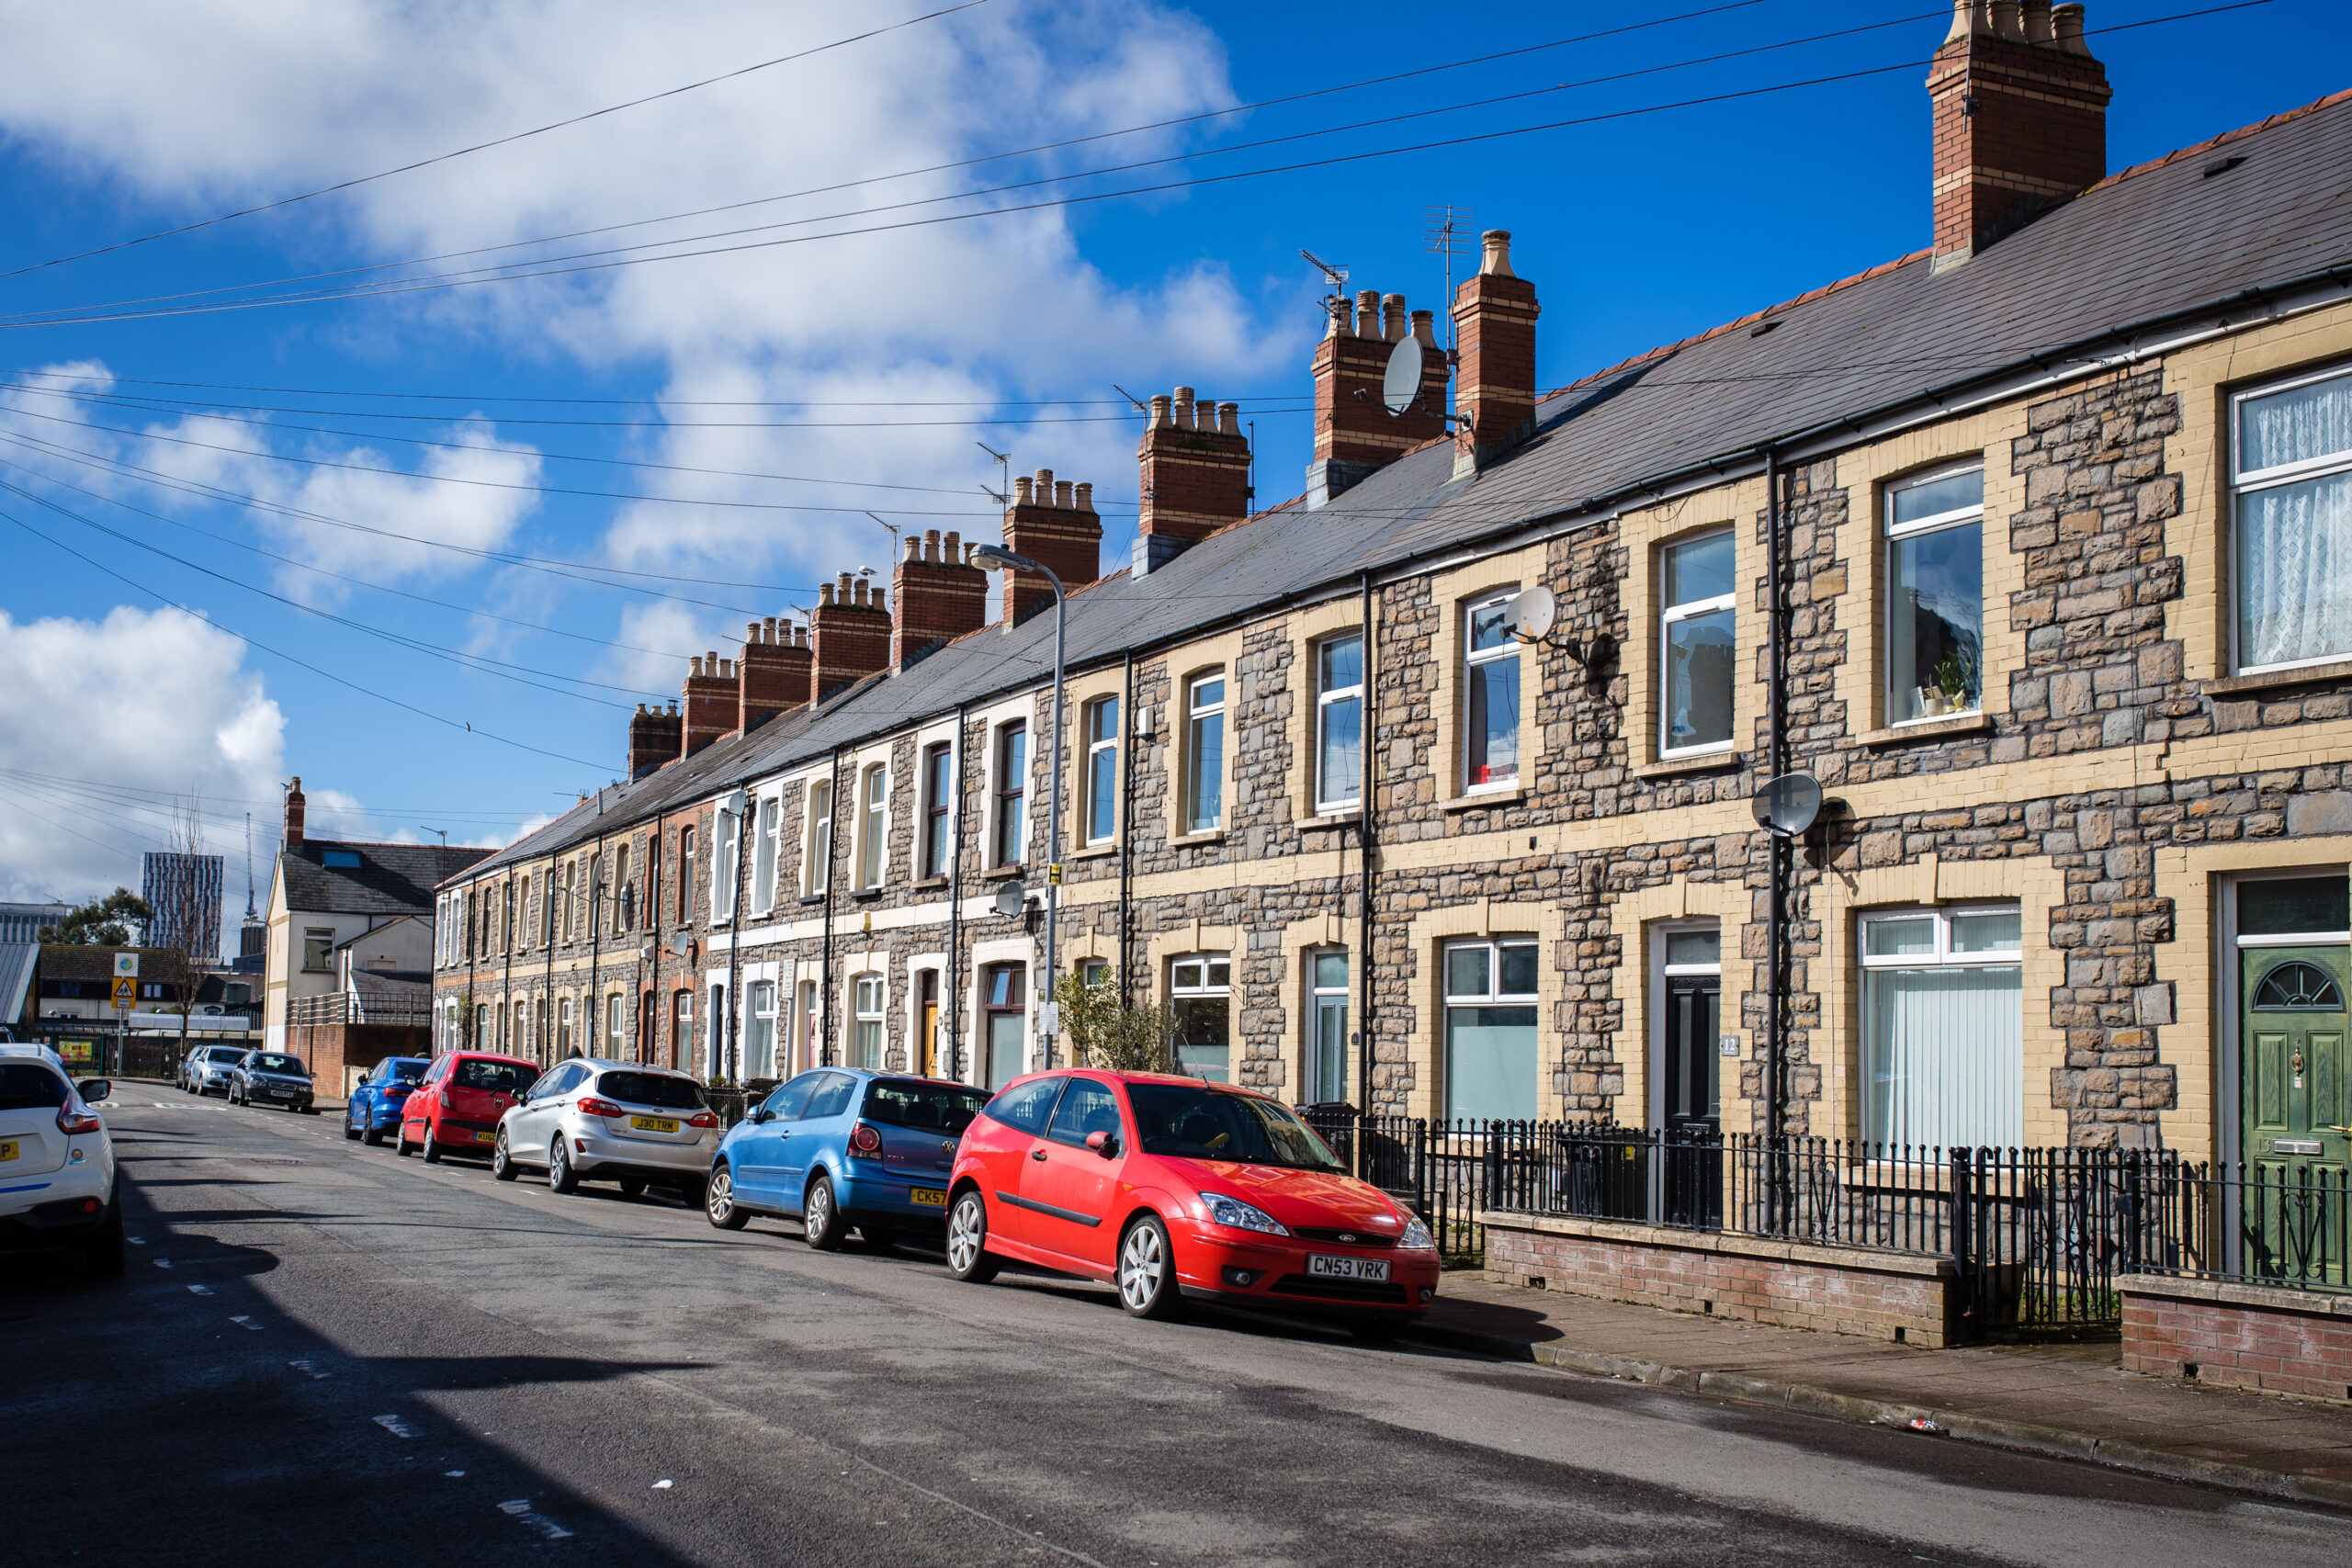 A row of terraced houses in Cardiff, Wales.